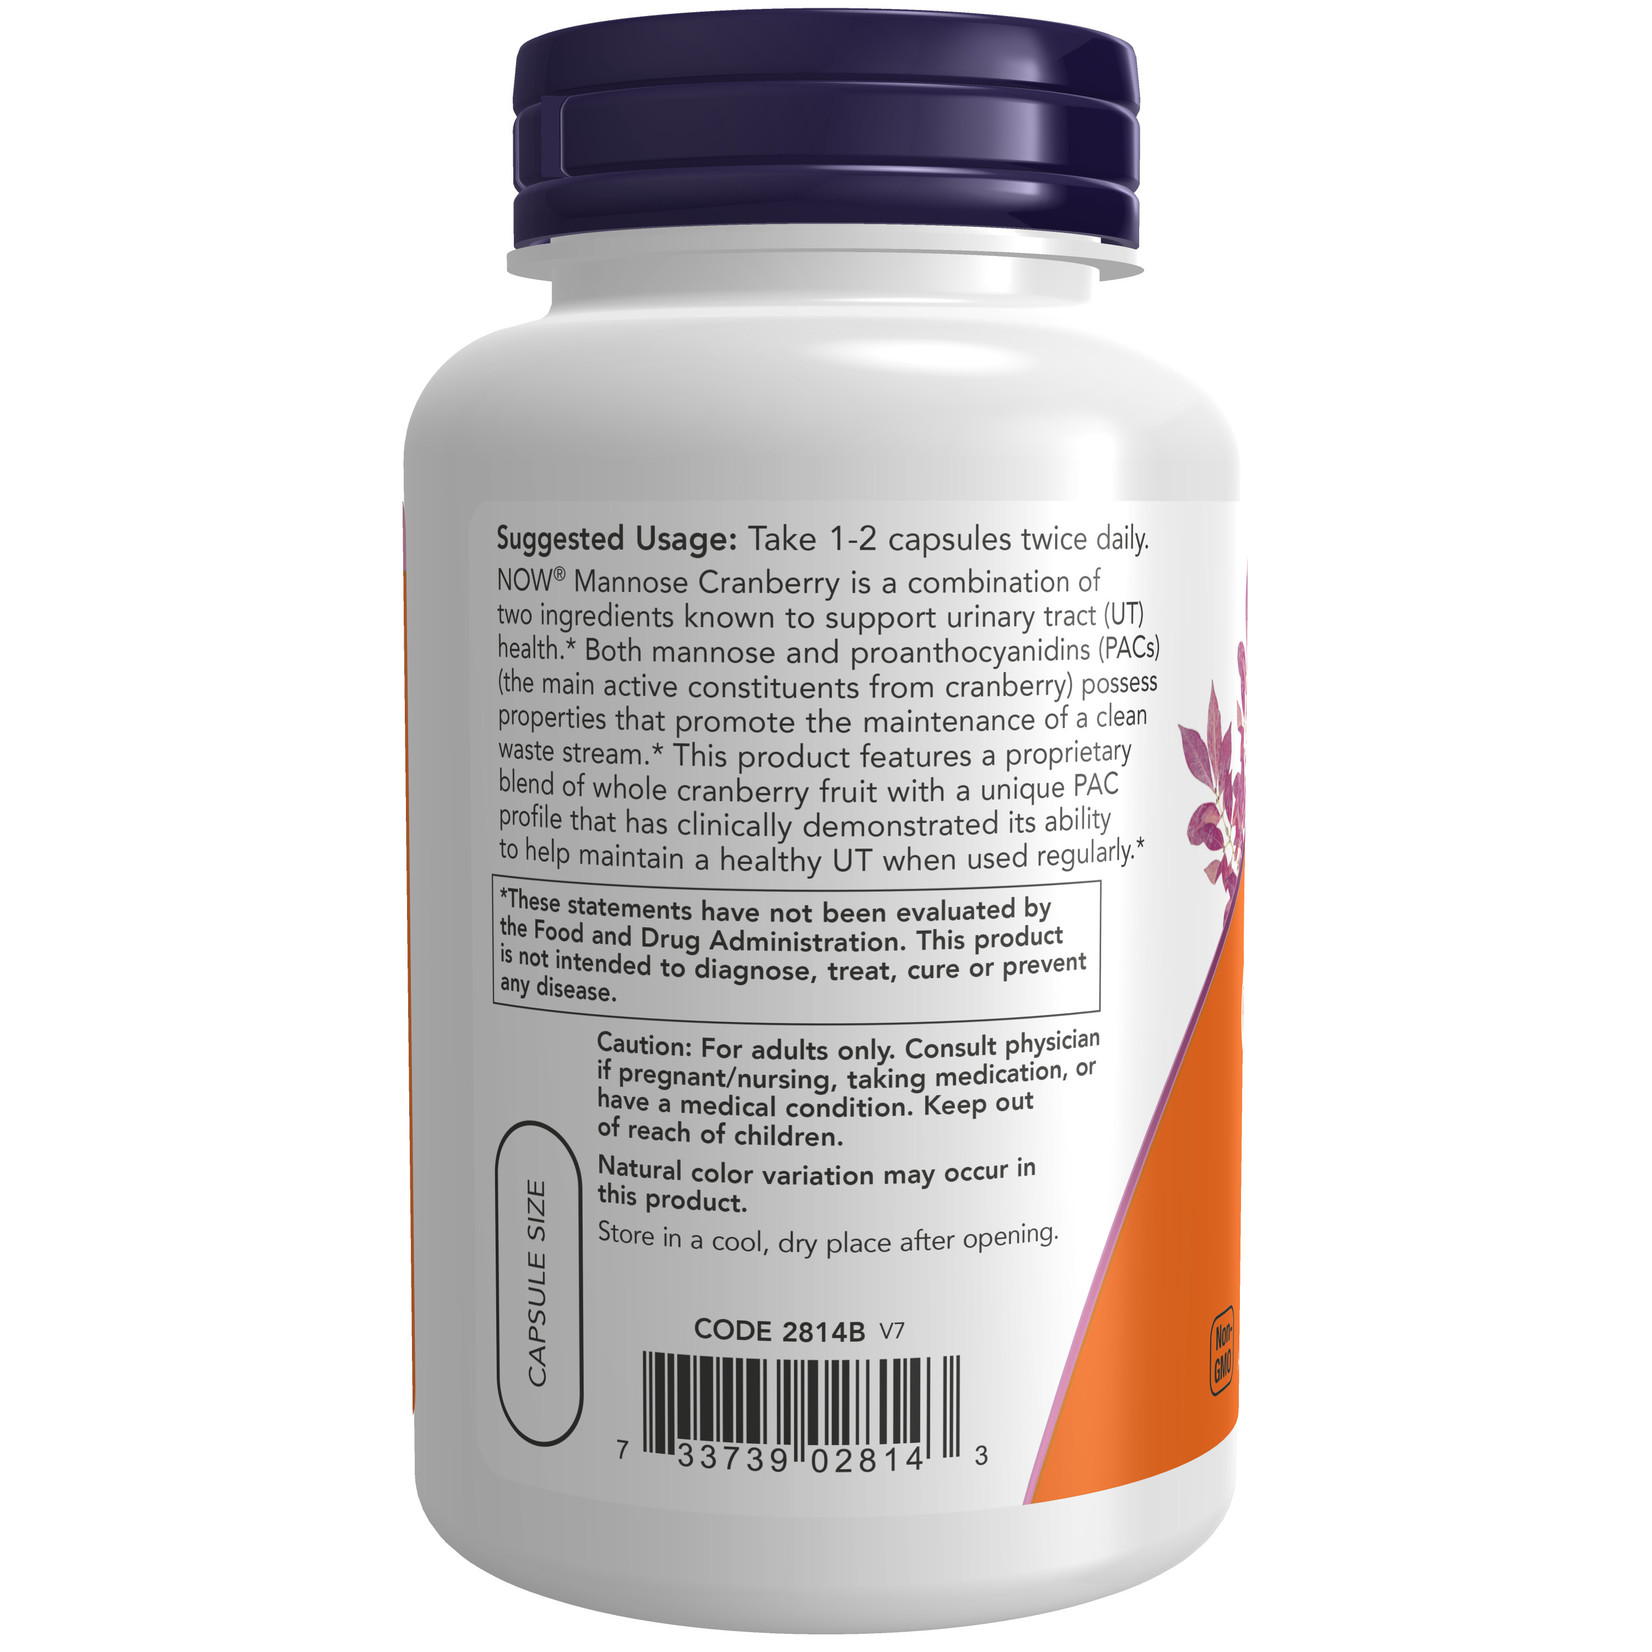 Now Now - Mannose Cranberry - 90 Veg Capsules